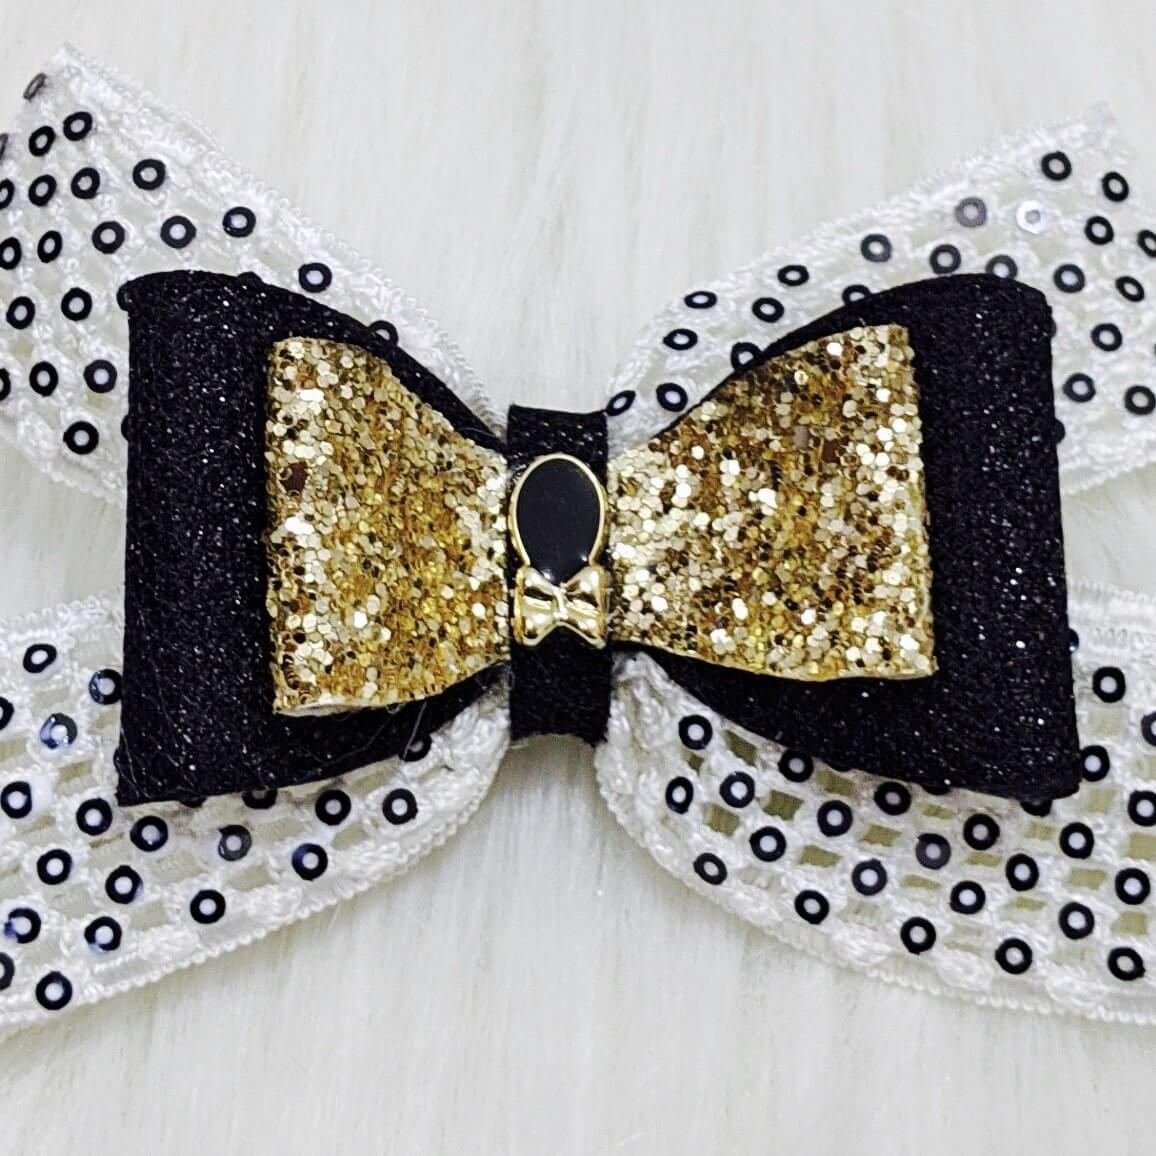 Black and White Embellished Hair Bow Clip | Hair Accessories for Kids and Girls